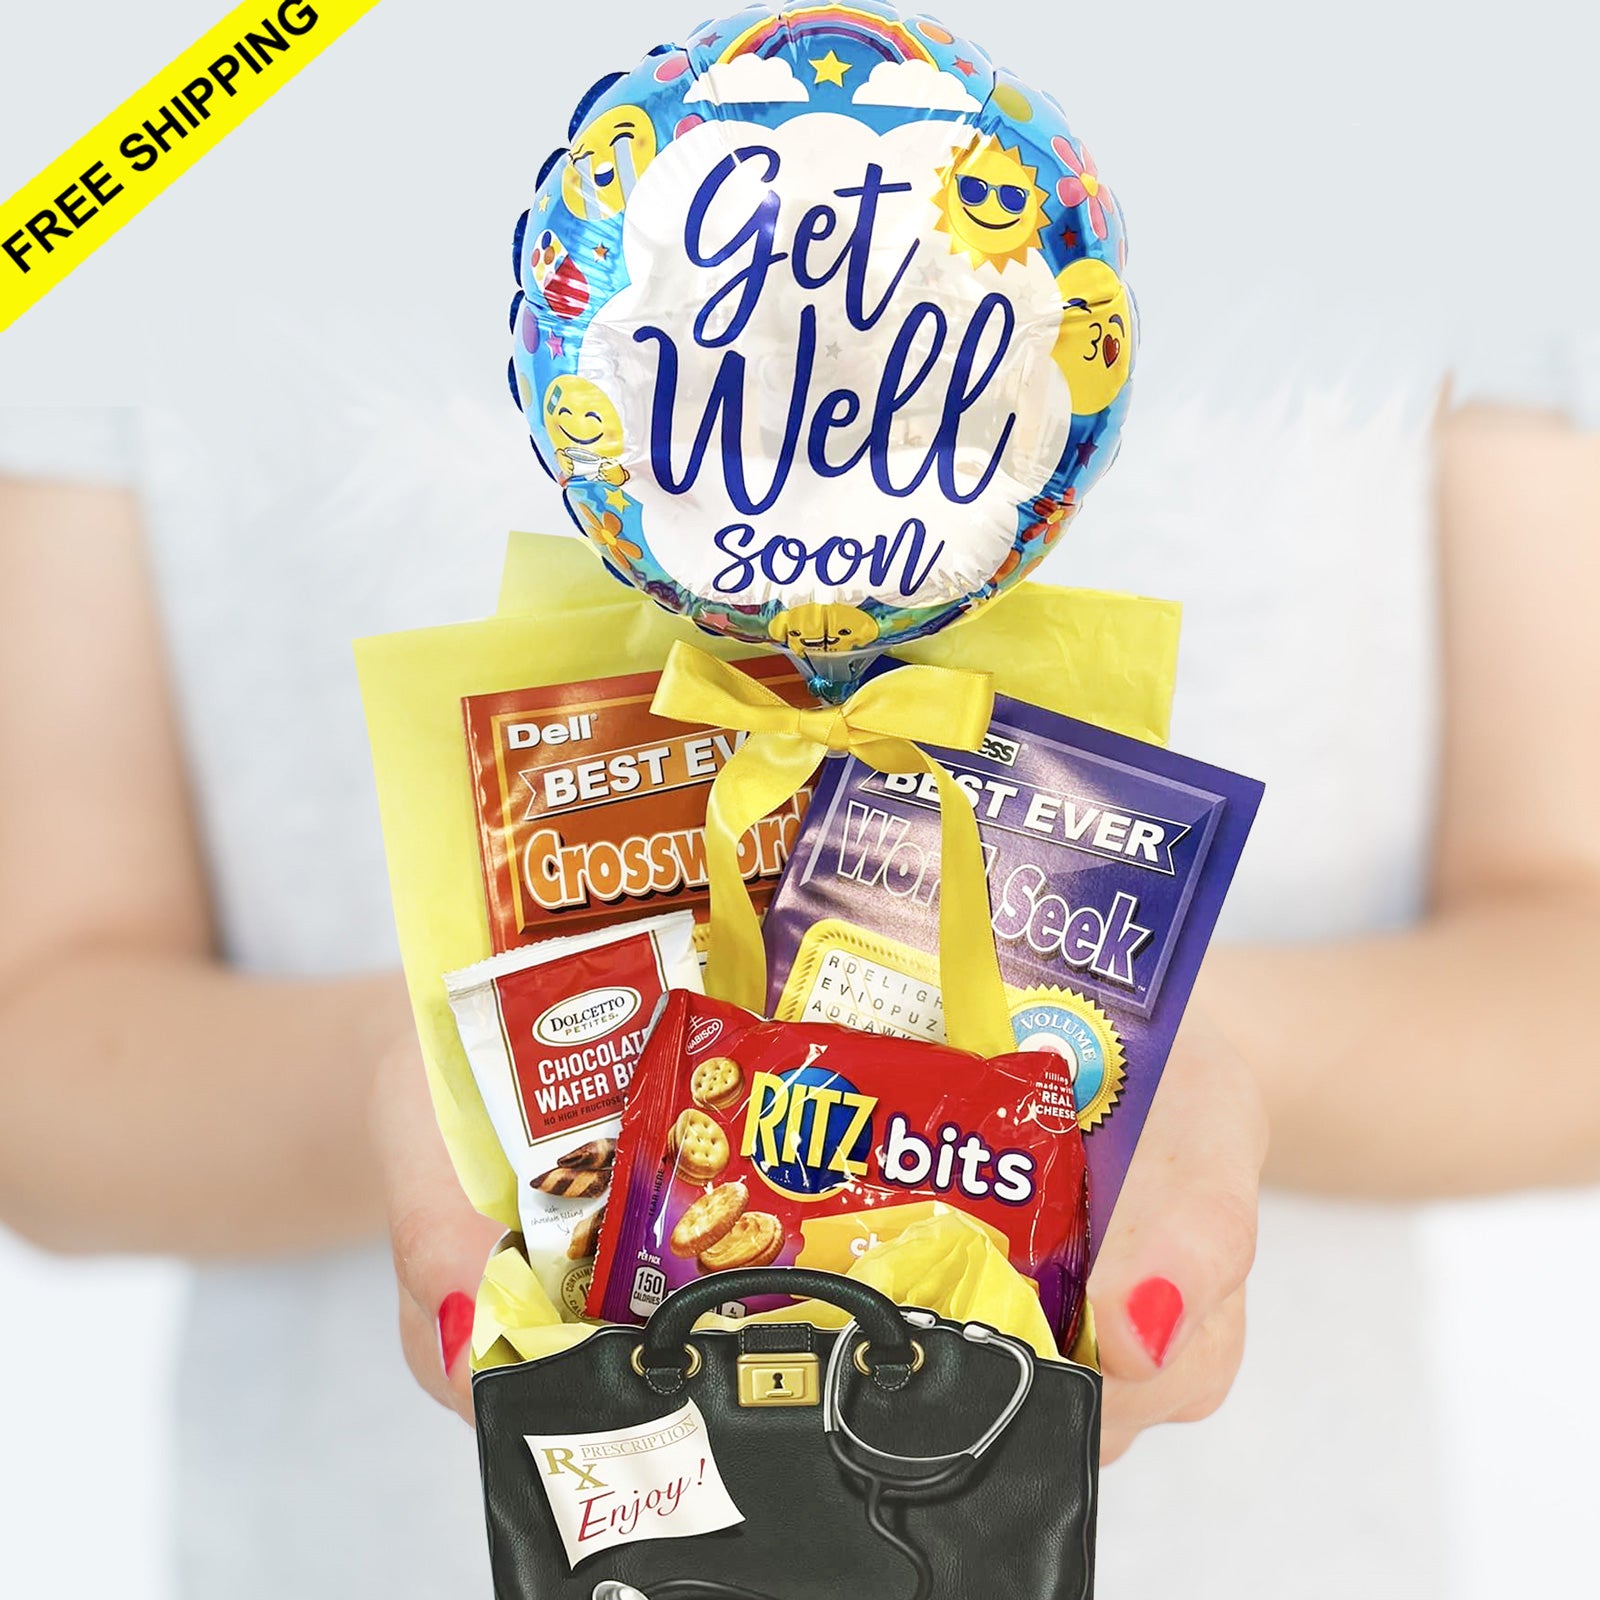 Gifts Fulfilled Birthday Gift Box with Cookies, Snacks, Happy Birthday Balloon for Men, Women, All Ages Unisex Birthday Gift Set for Her and for Him